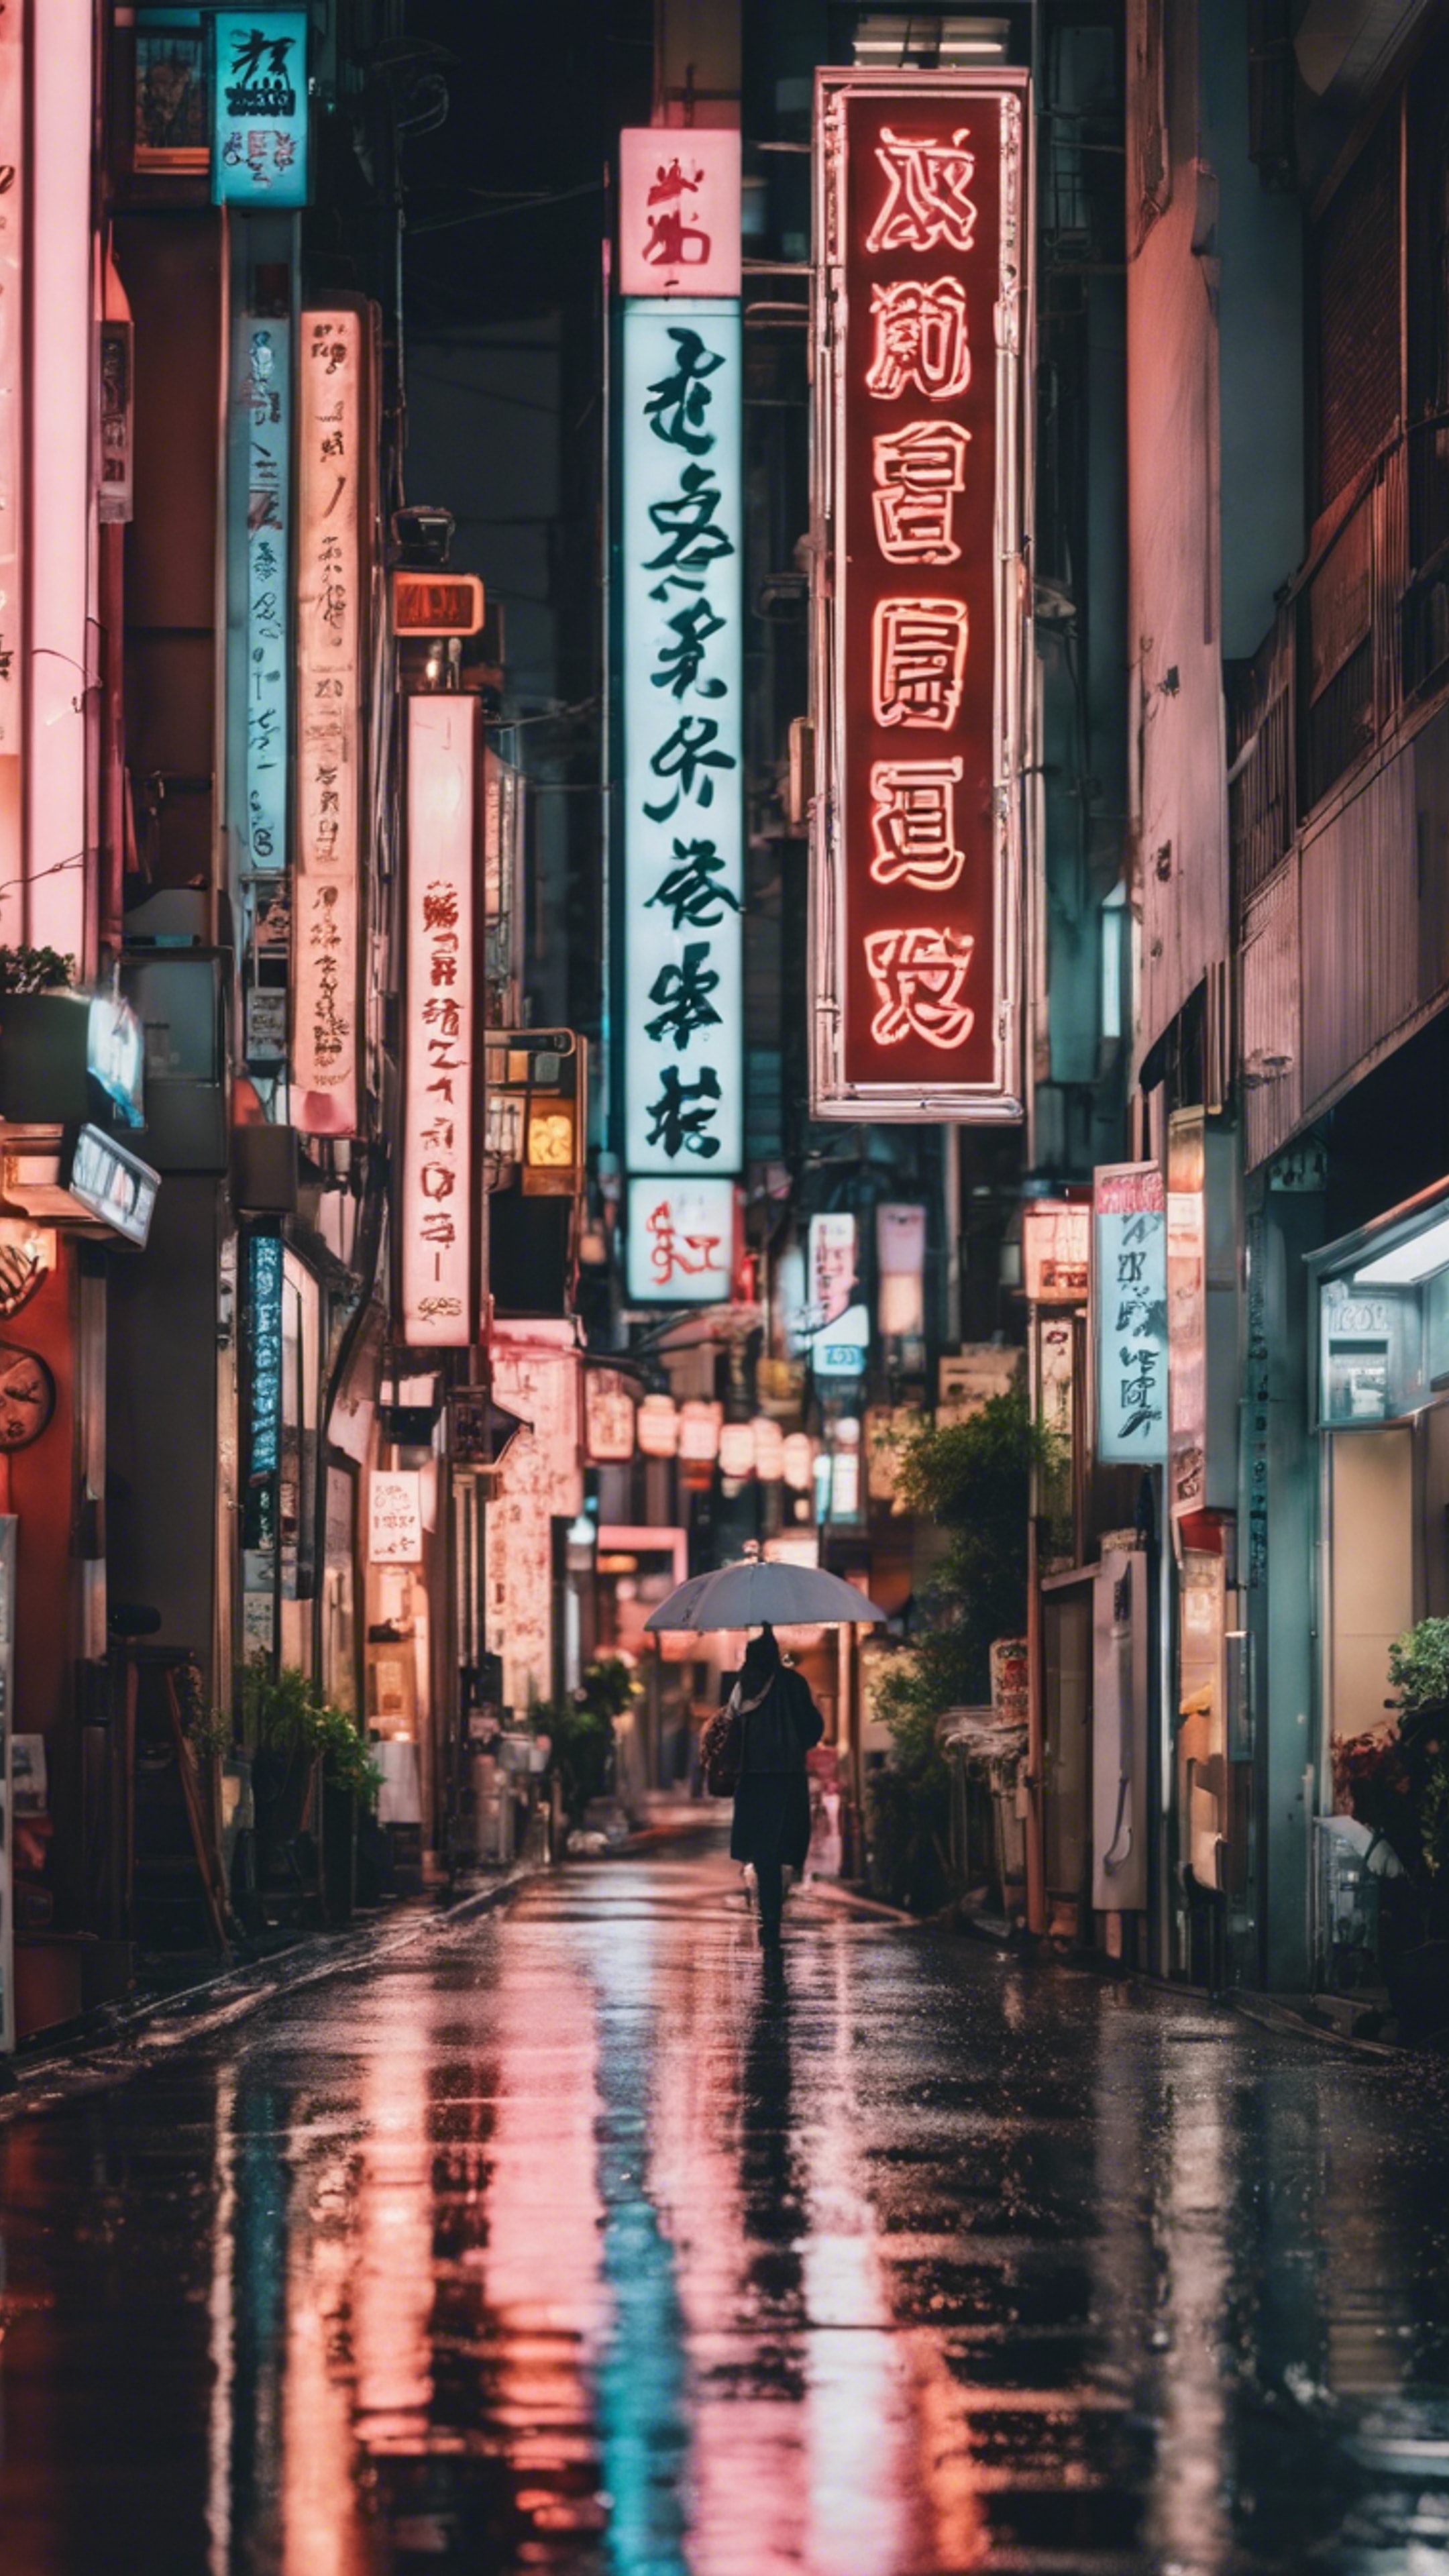 A trendy street in downtown Tokyo at dusk, lit by the neon signage of chic boutiques and popular cafés, reflecting off the wet pavement. Wallpaper[79ed9a41a09a4331bacf]